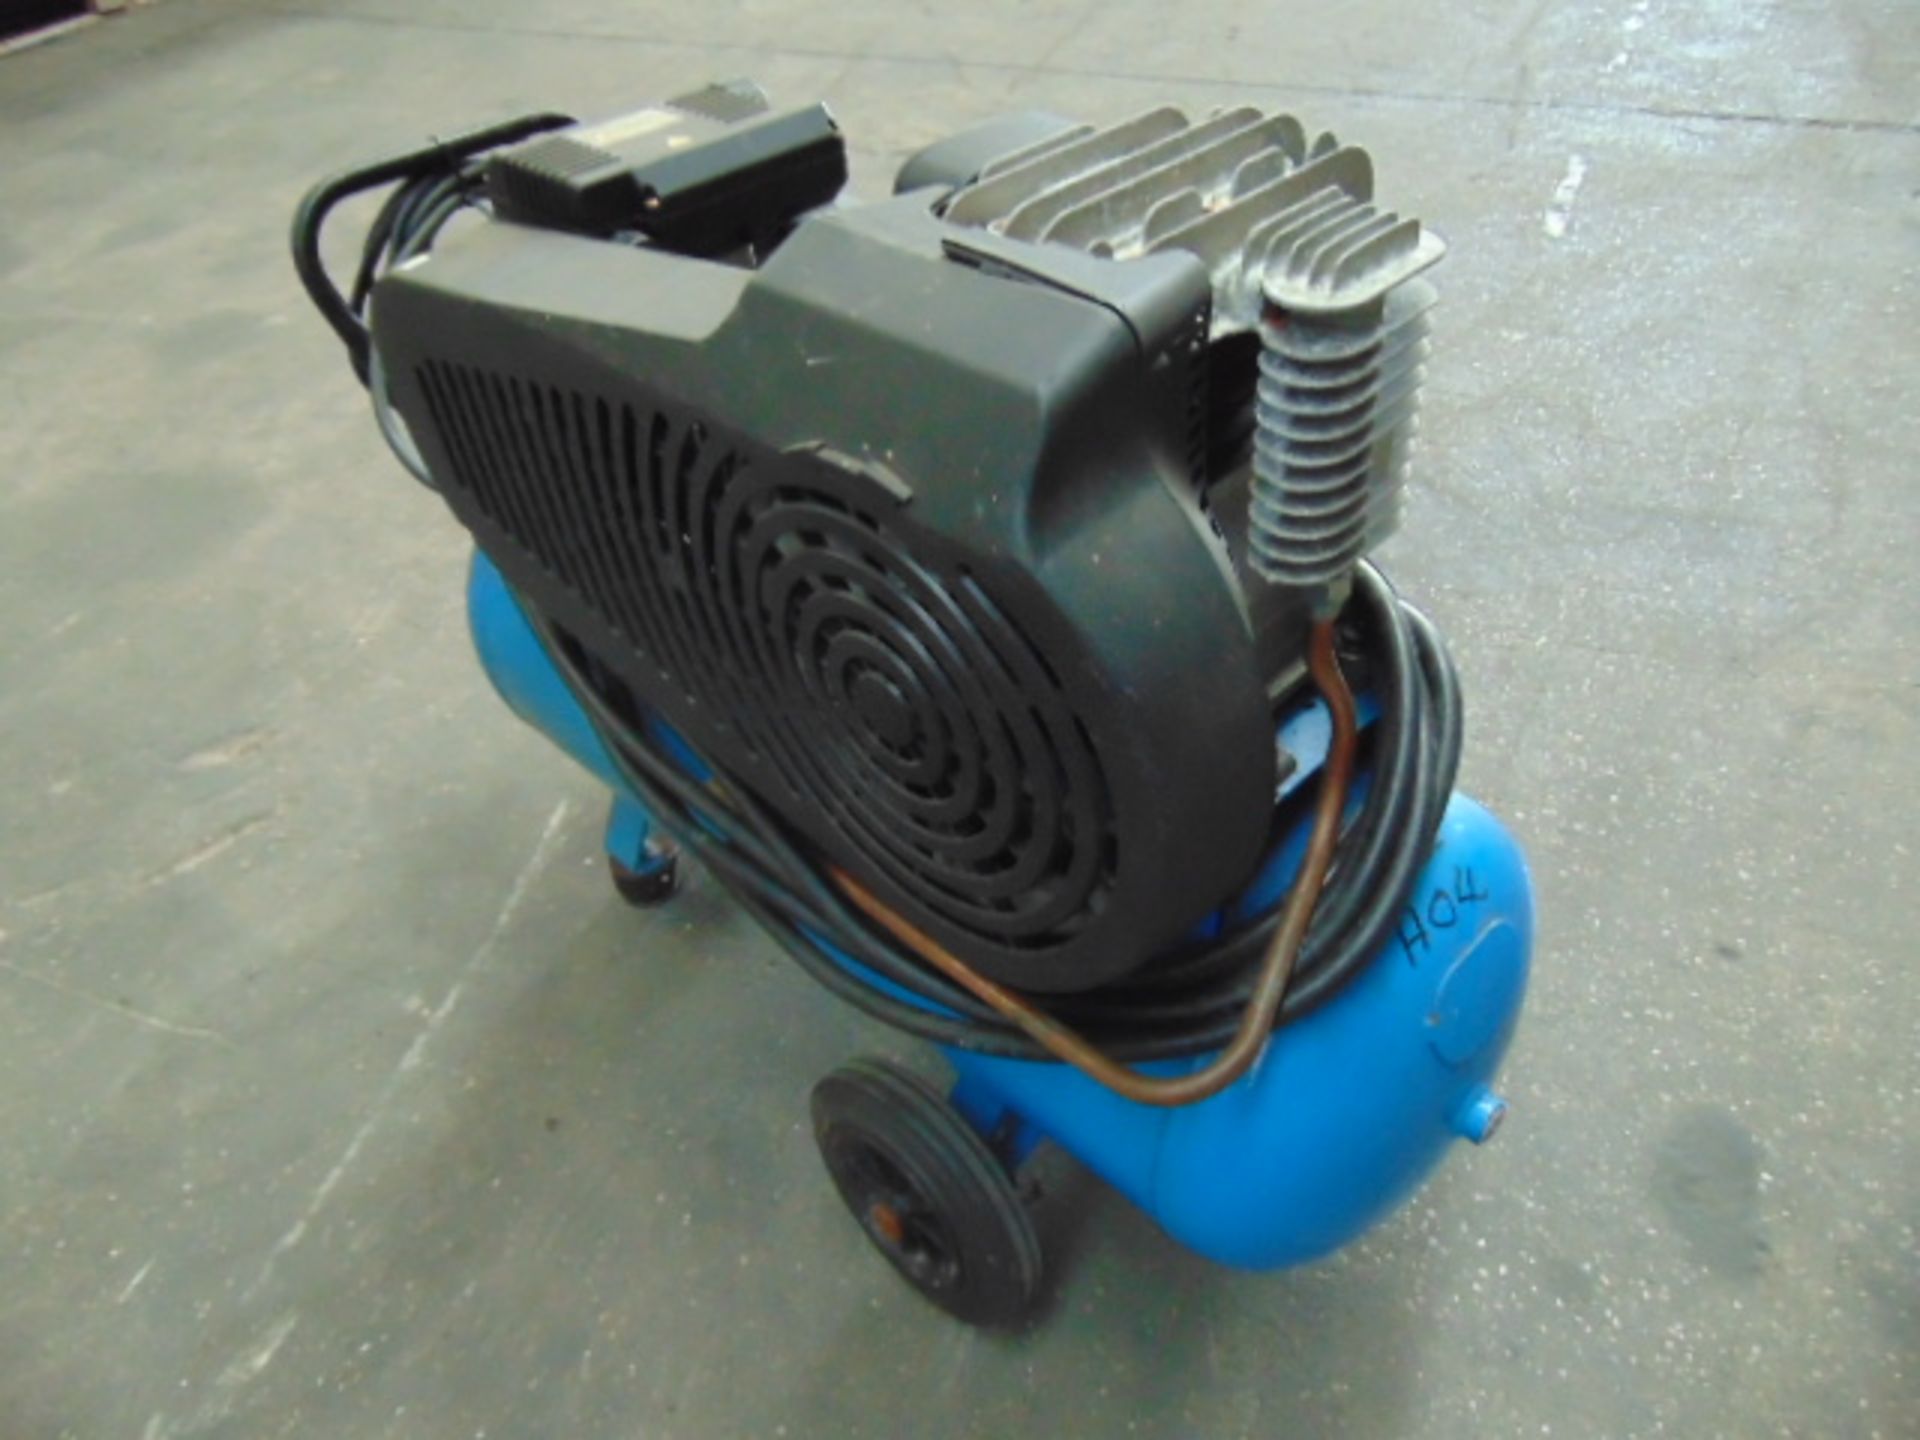 ABAC B 2800B-60 cm 3 V240 Kompex Mobile Air Compressor with PCL Mk 3 Inflator - Image 5 of 9